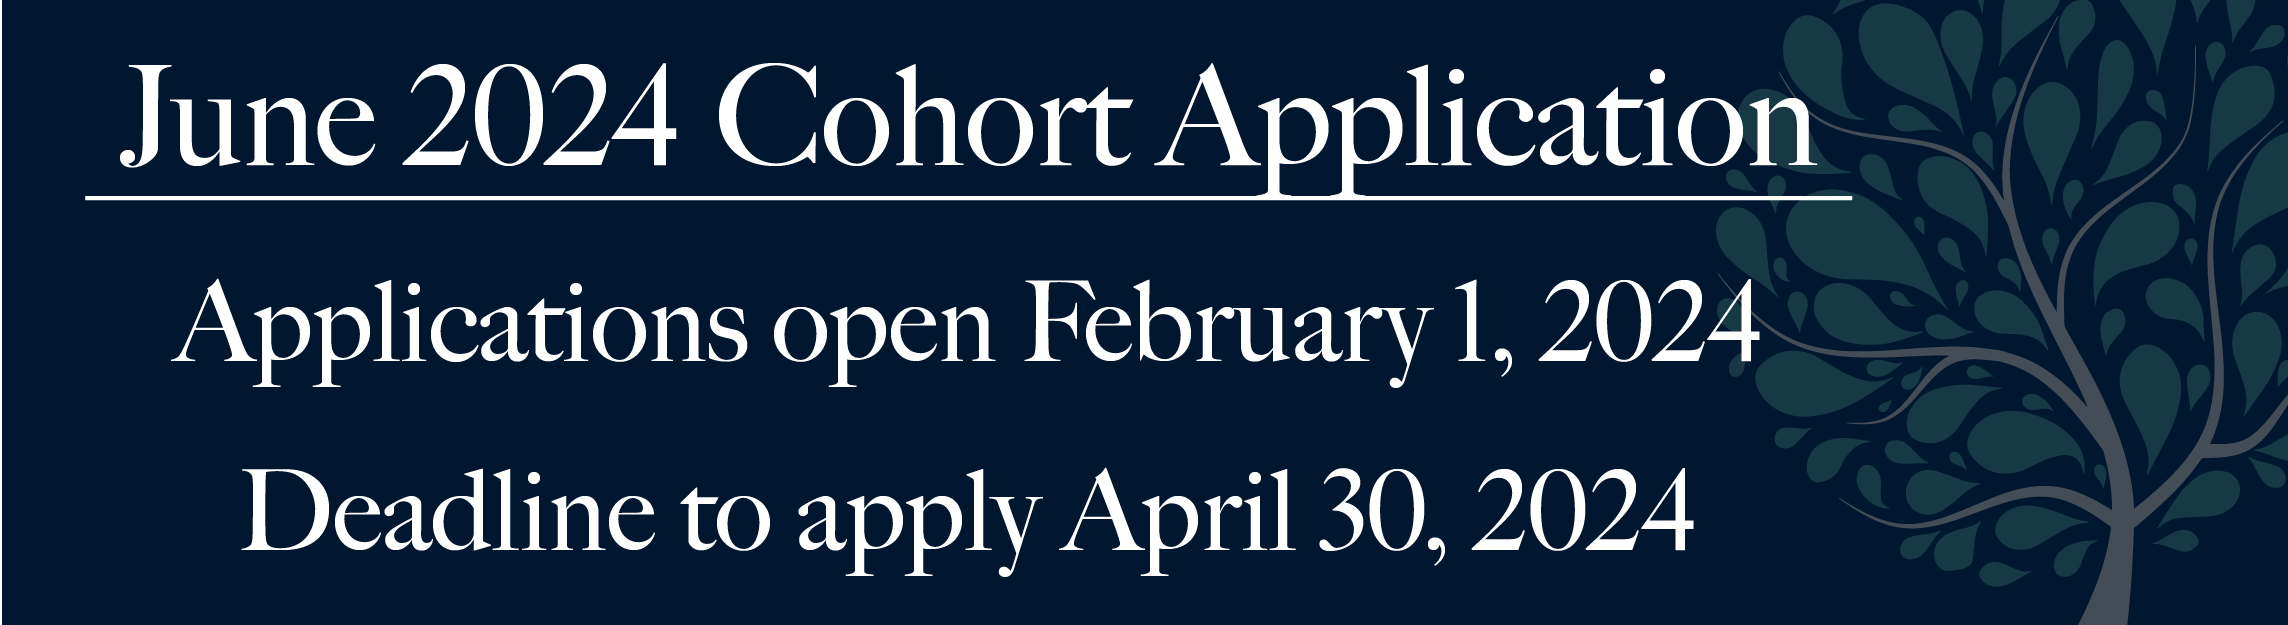 Image that says: June 2024 Cohort Application Dates. Application window opens: Thursday, February 1, 2024. Deadline to apply: Tuesday, April 30, 2024